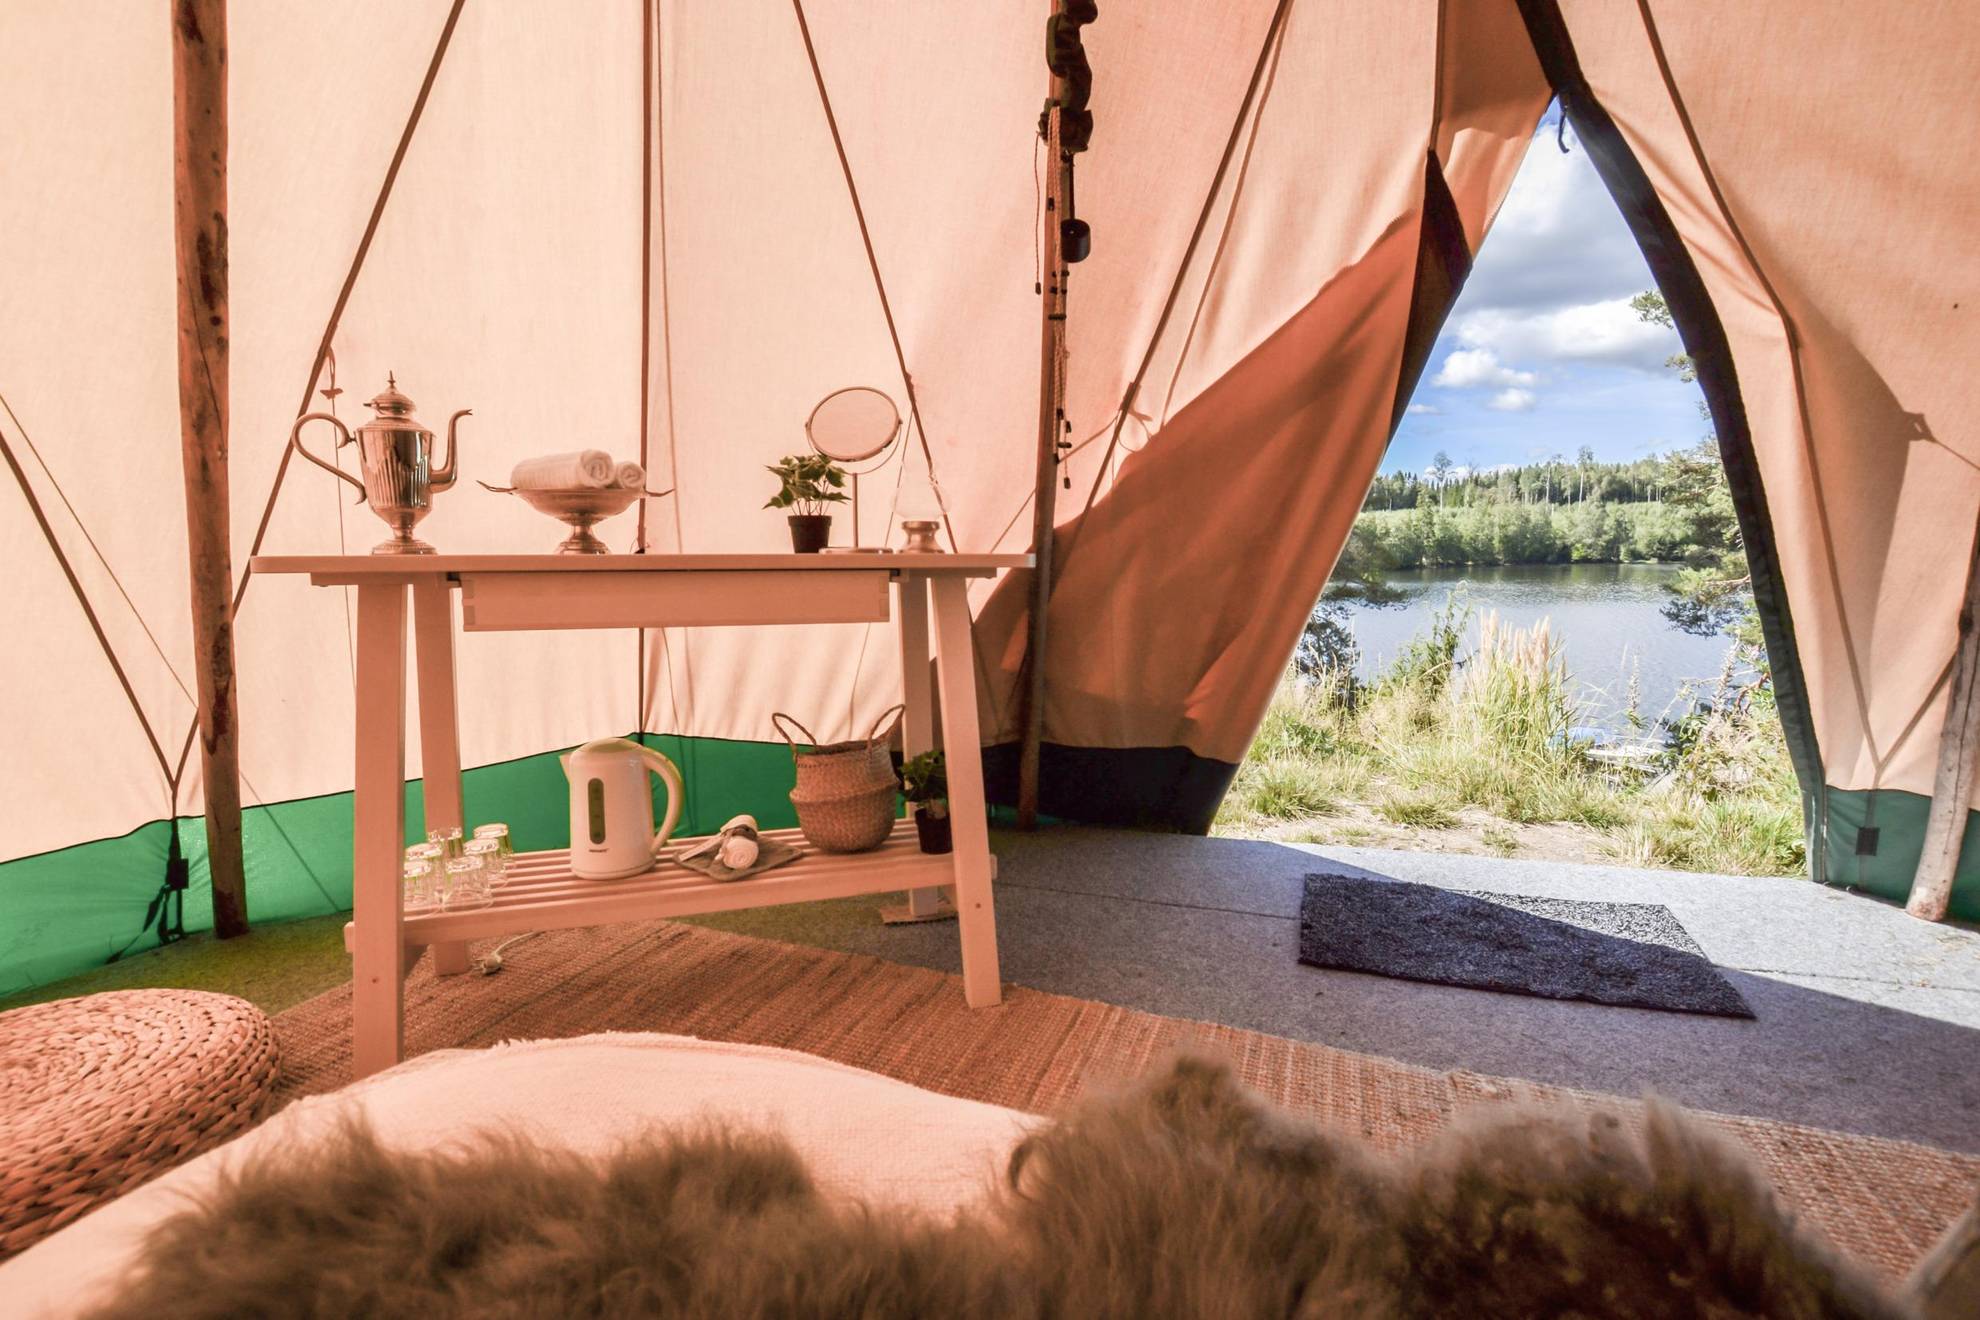 A view from inside a tipi tent. A forest and a lake can be seen outside.